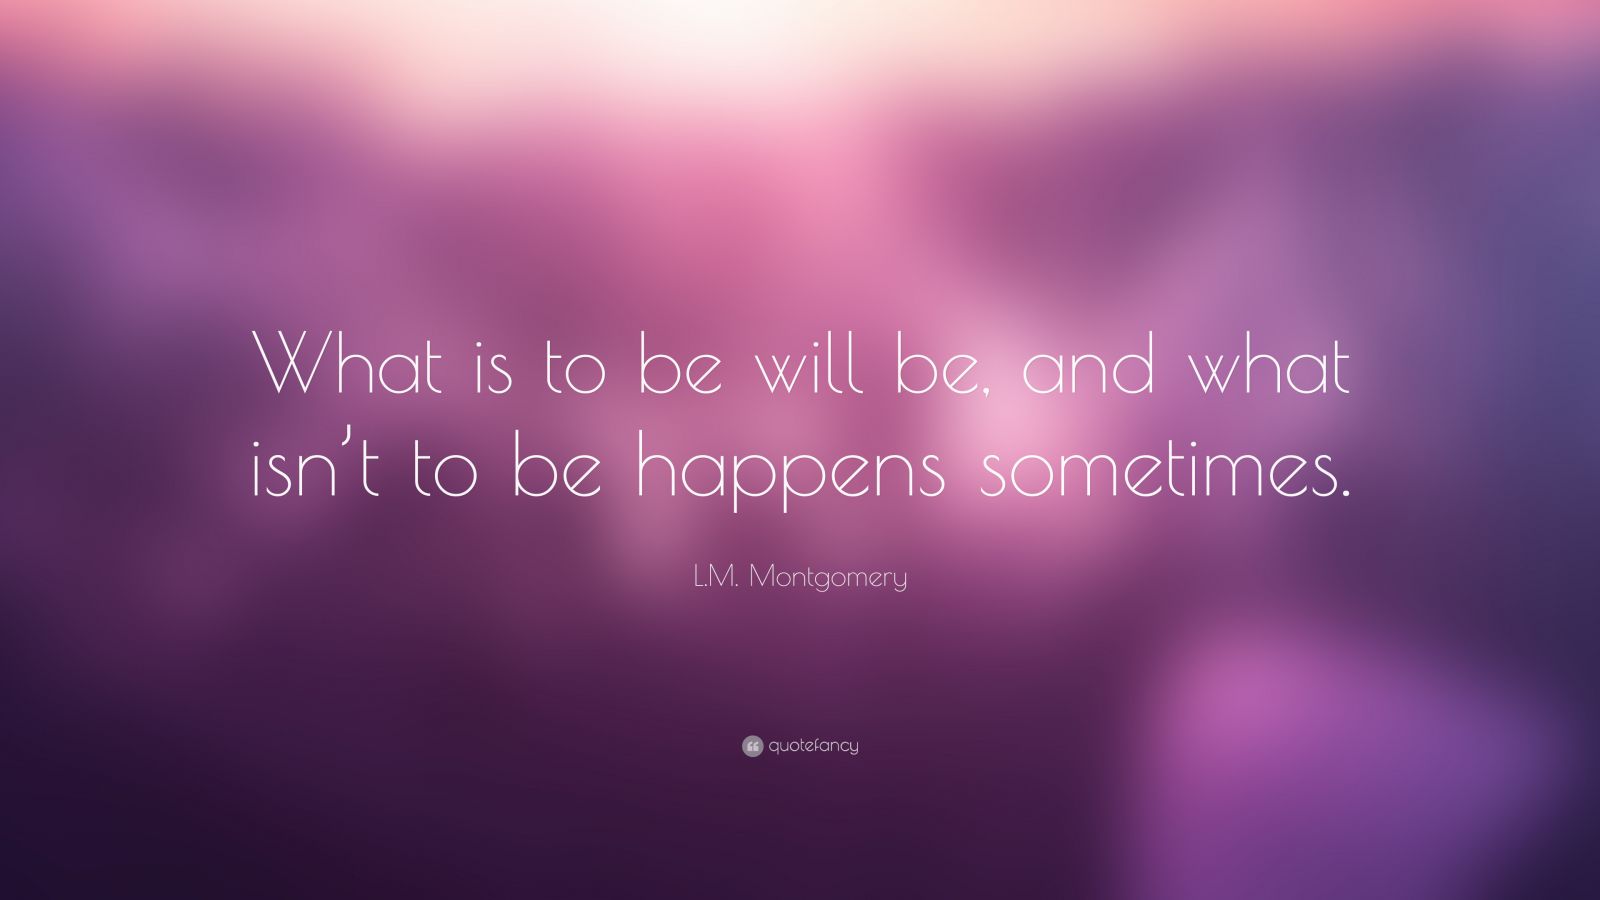 L.M. Montgomery Quote: “What is to be will be, and what isn’t to be ...